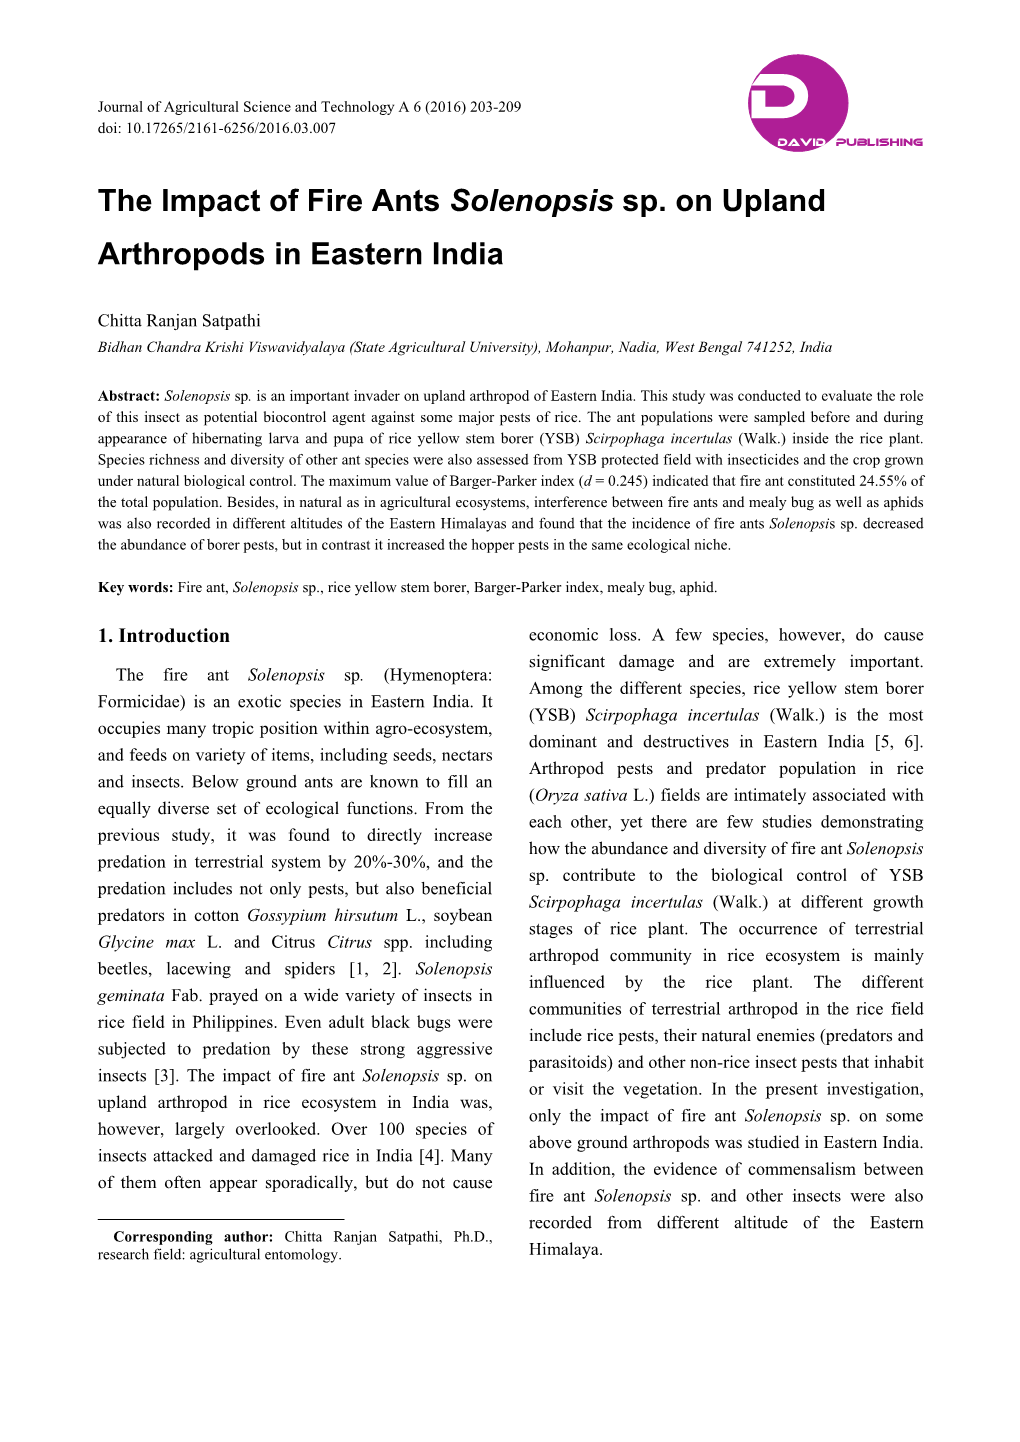 The Impact of Fire Ants Solenopsis Sp. on Upland Arthropods in Eastern India